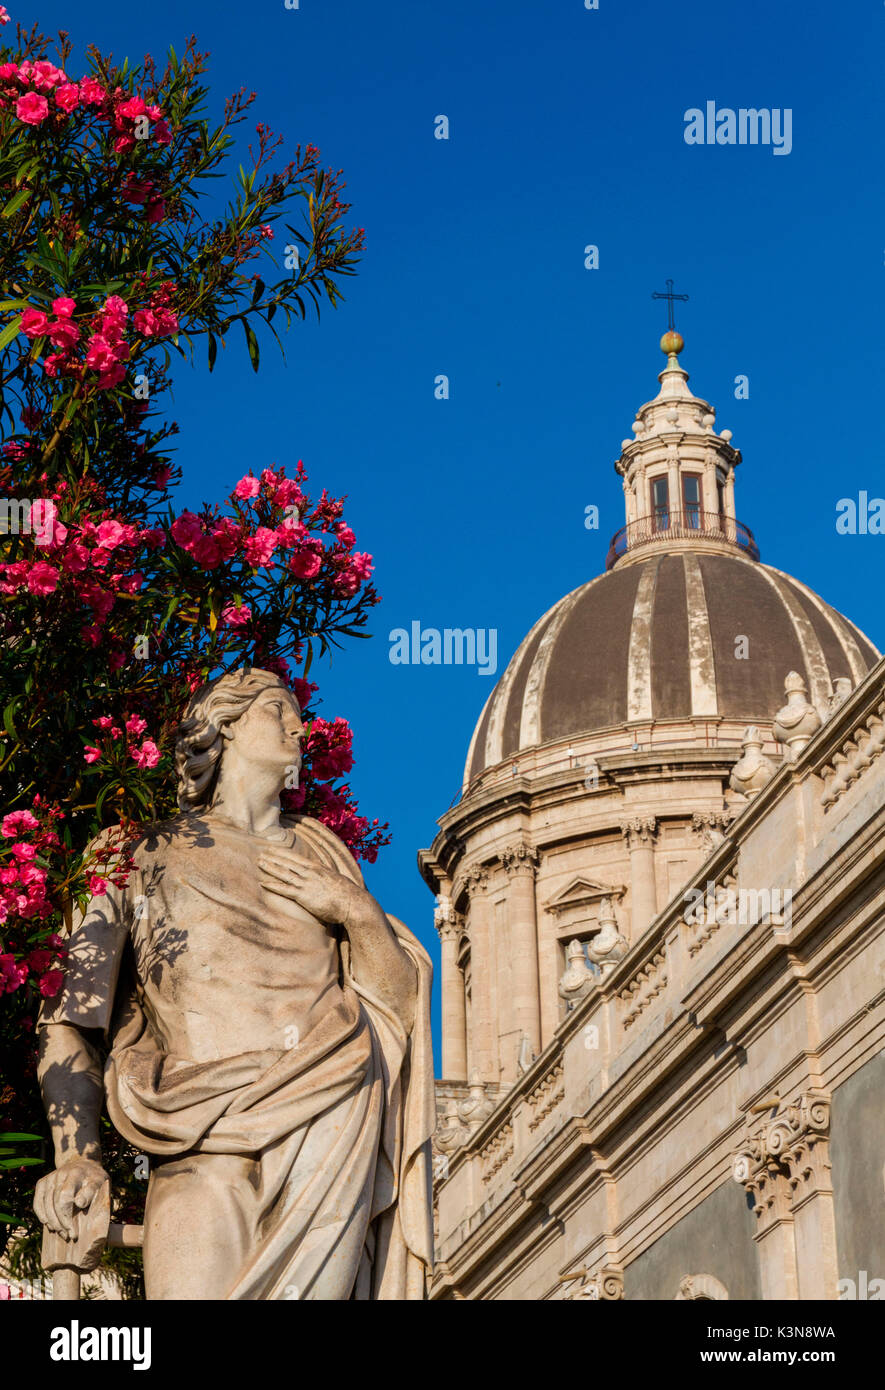 statues of the cathedral of Catania and the dome of the abbey of s.agata, Catania, Sicily, Italy, Europe Stock Photo